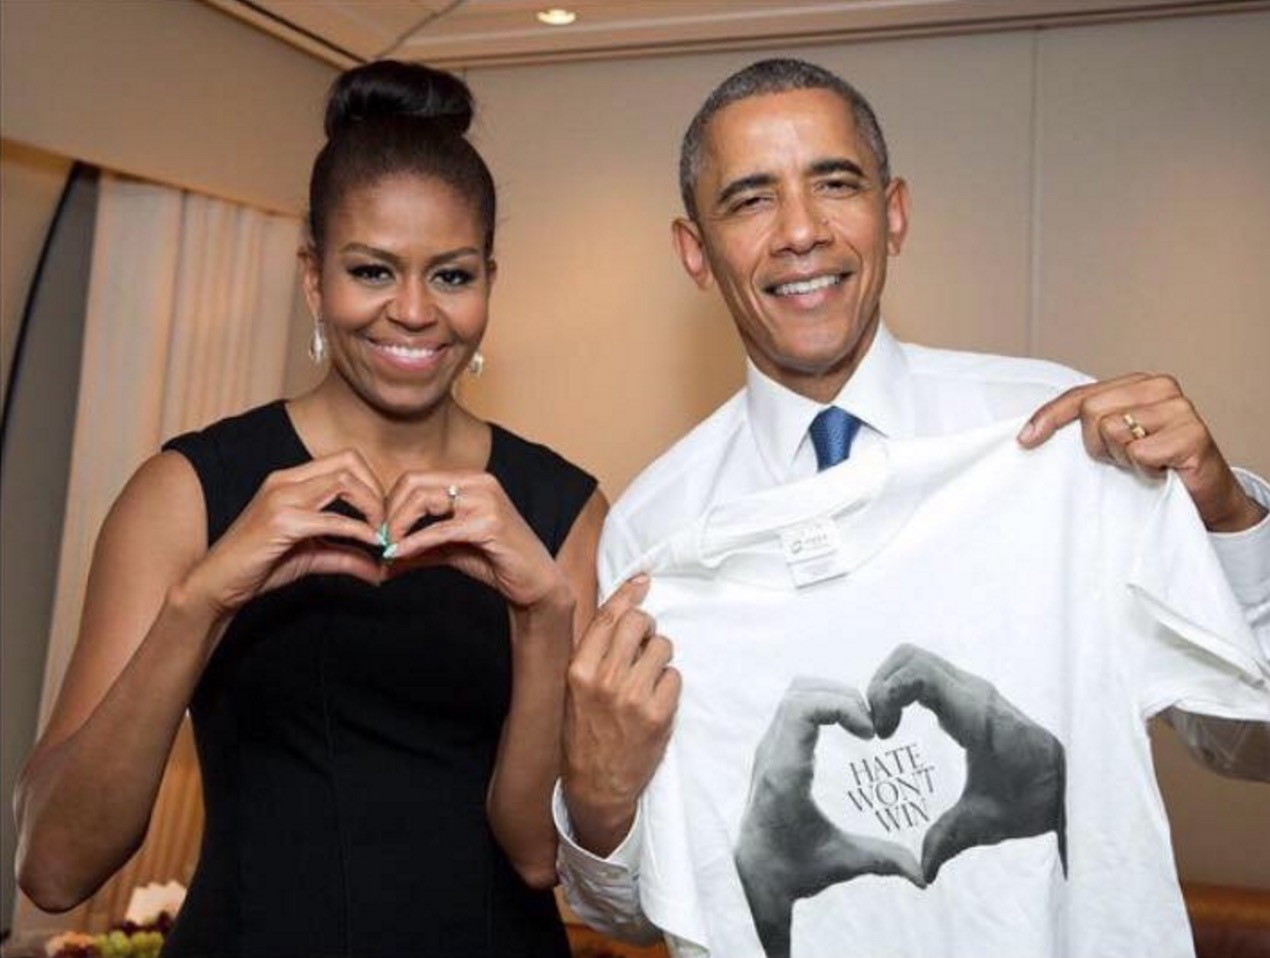 She started a campaign to spread love in stead of hate, which got picked up by President Obama.